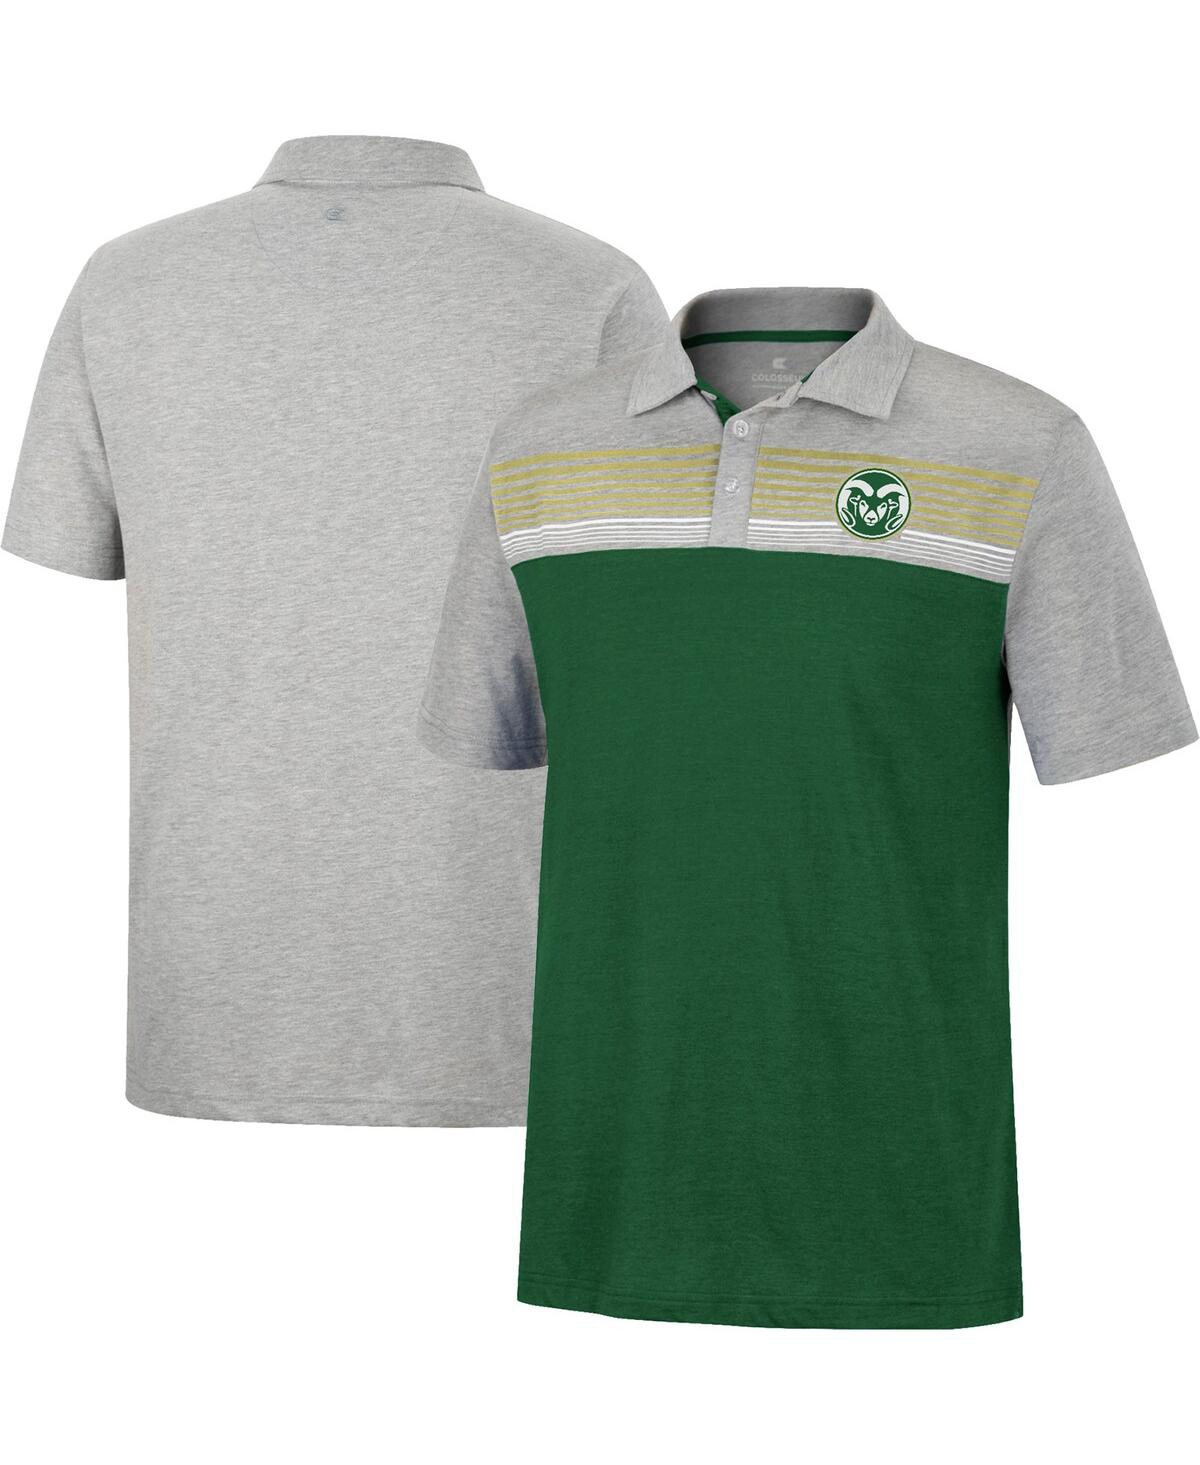 Men's Colosseum Green, Heathered Gray Colorado State Rams Caddie Polo Shirt - Green, Heathered Gray